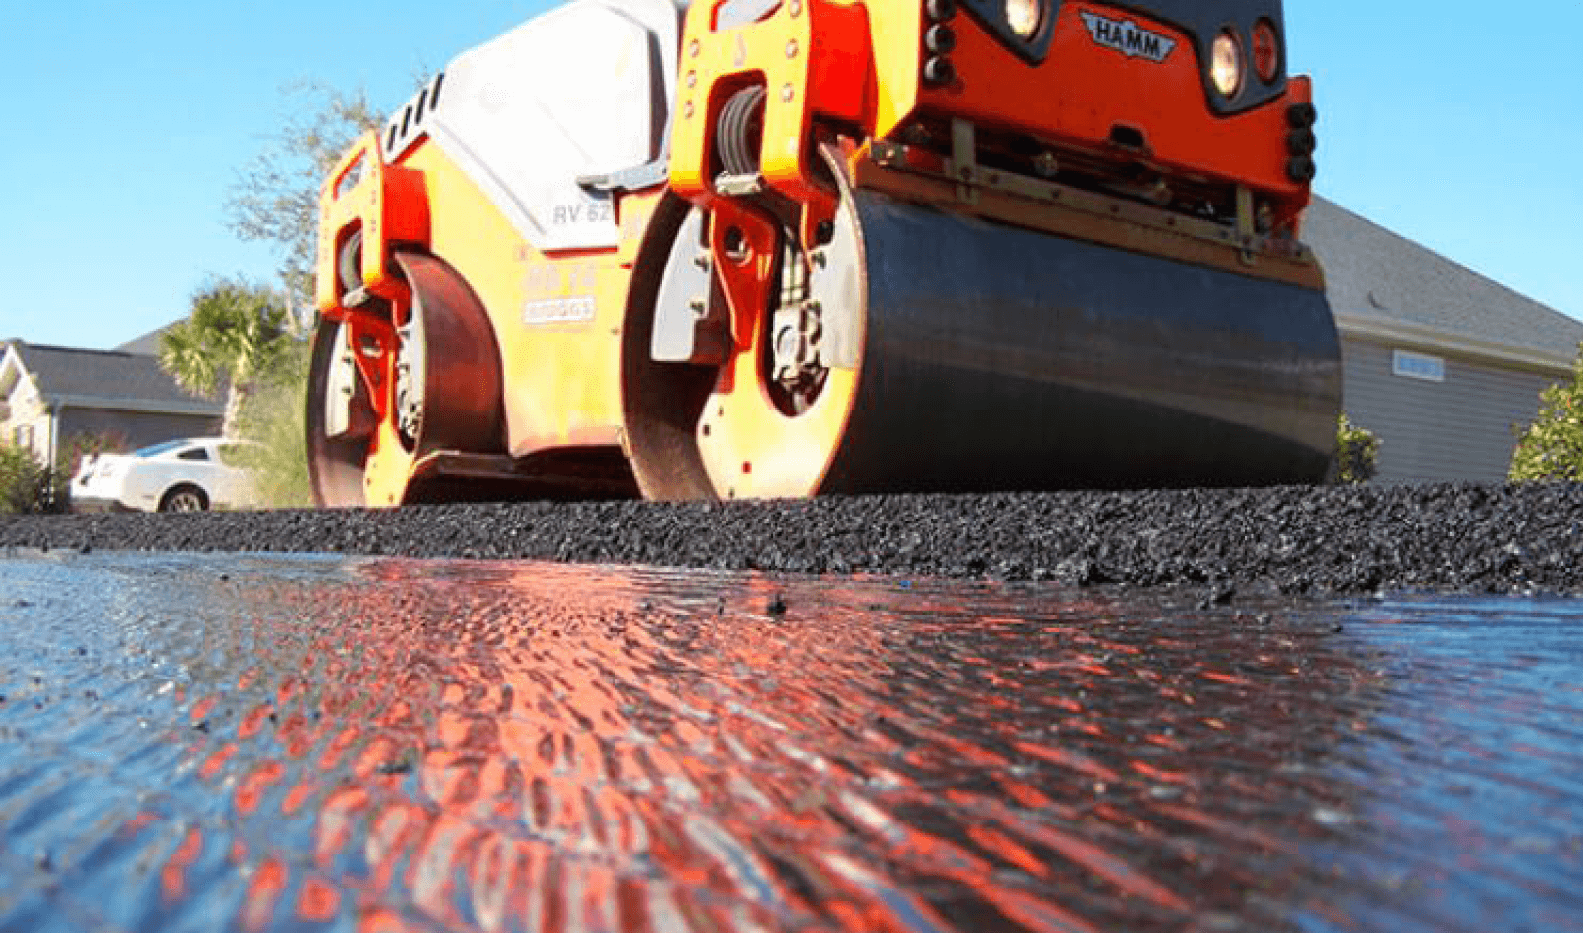 Proven high-quality products for asphalt applications